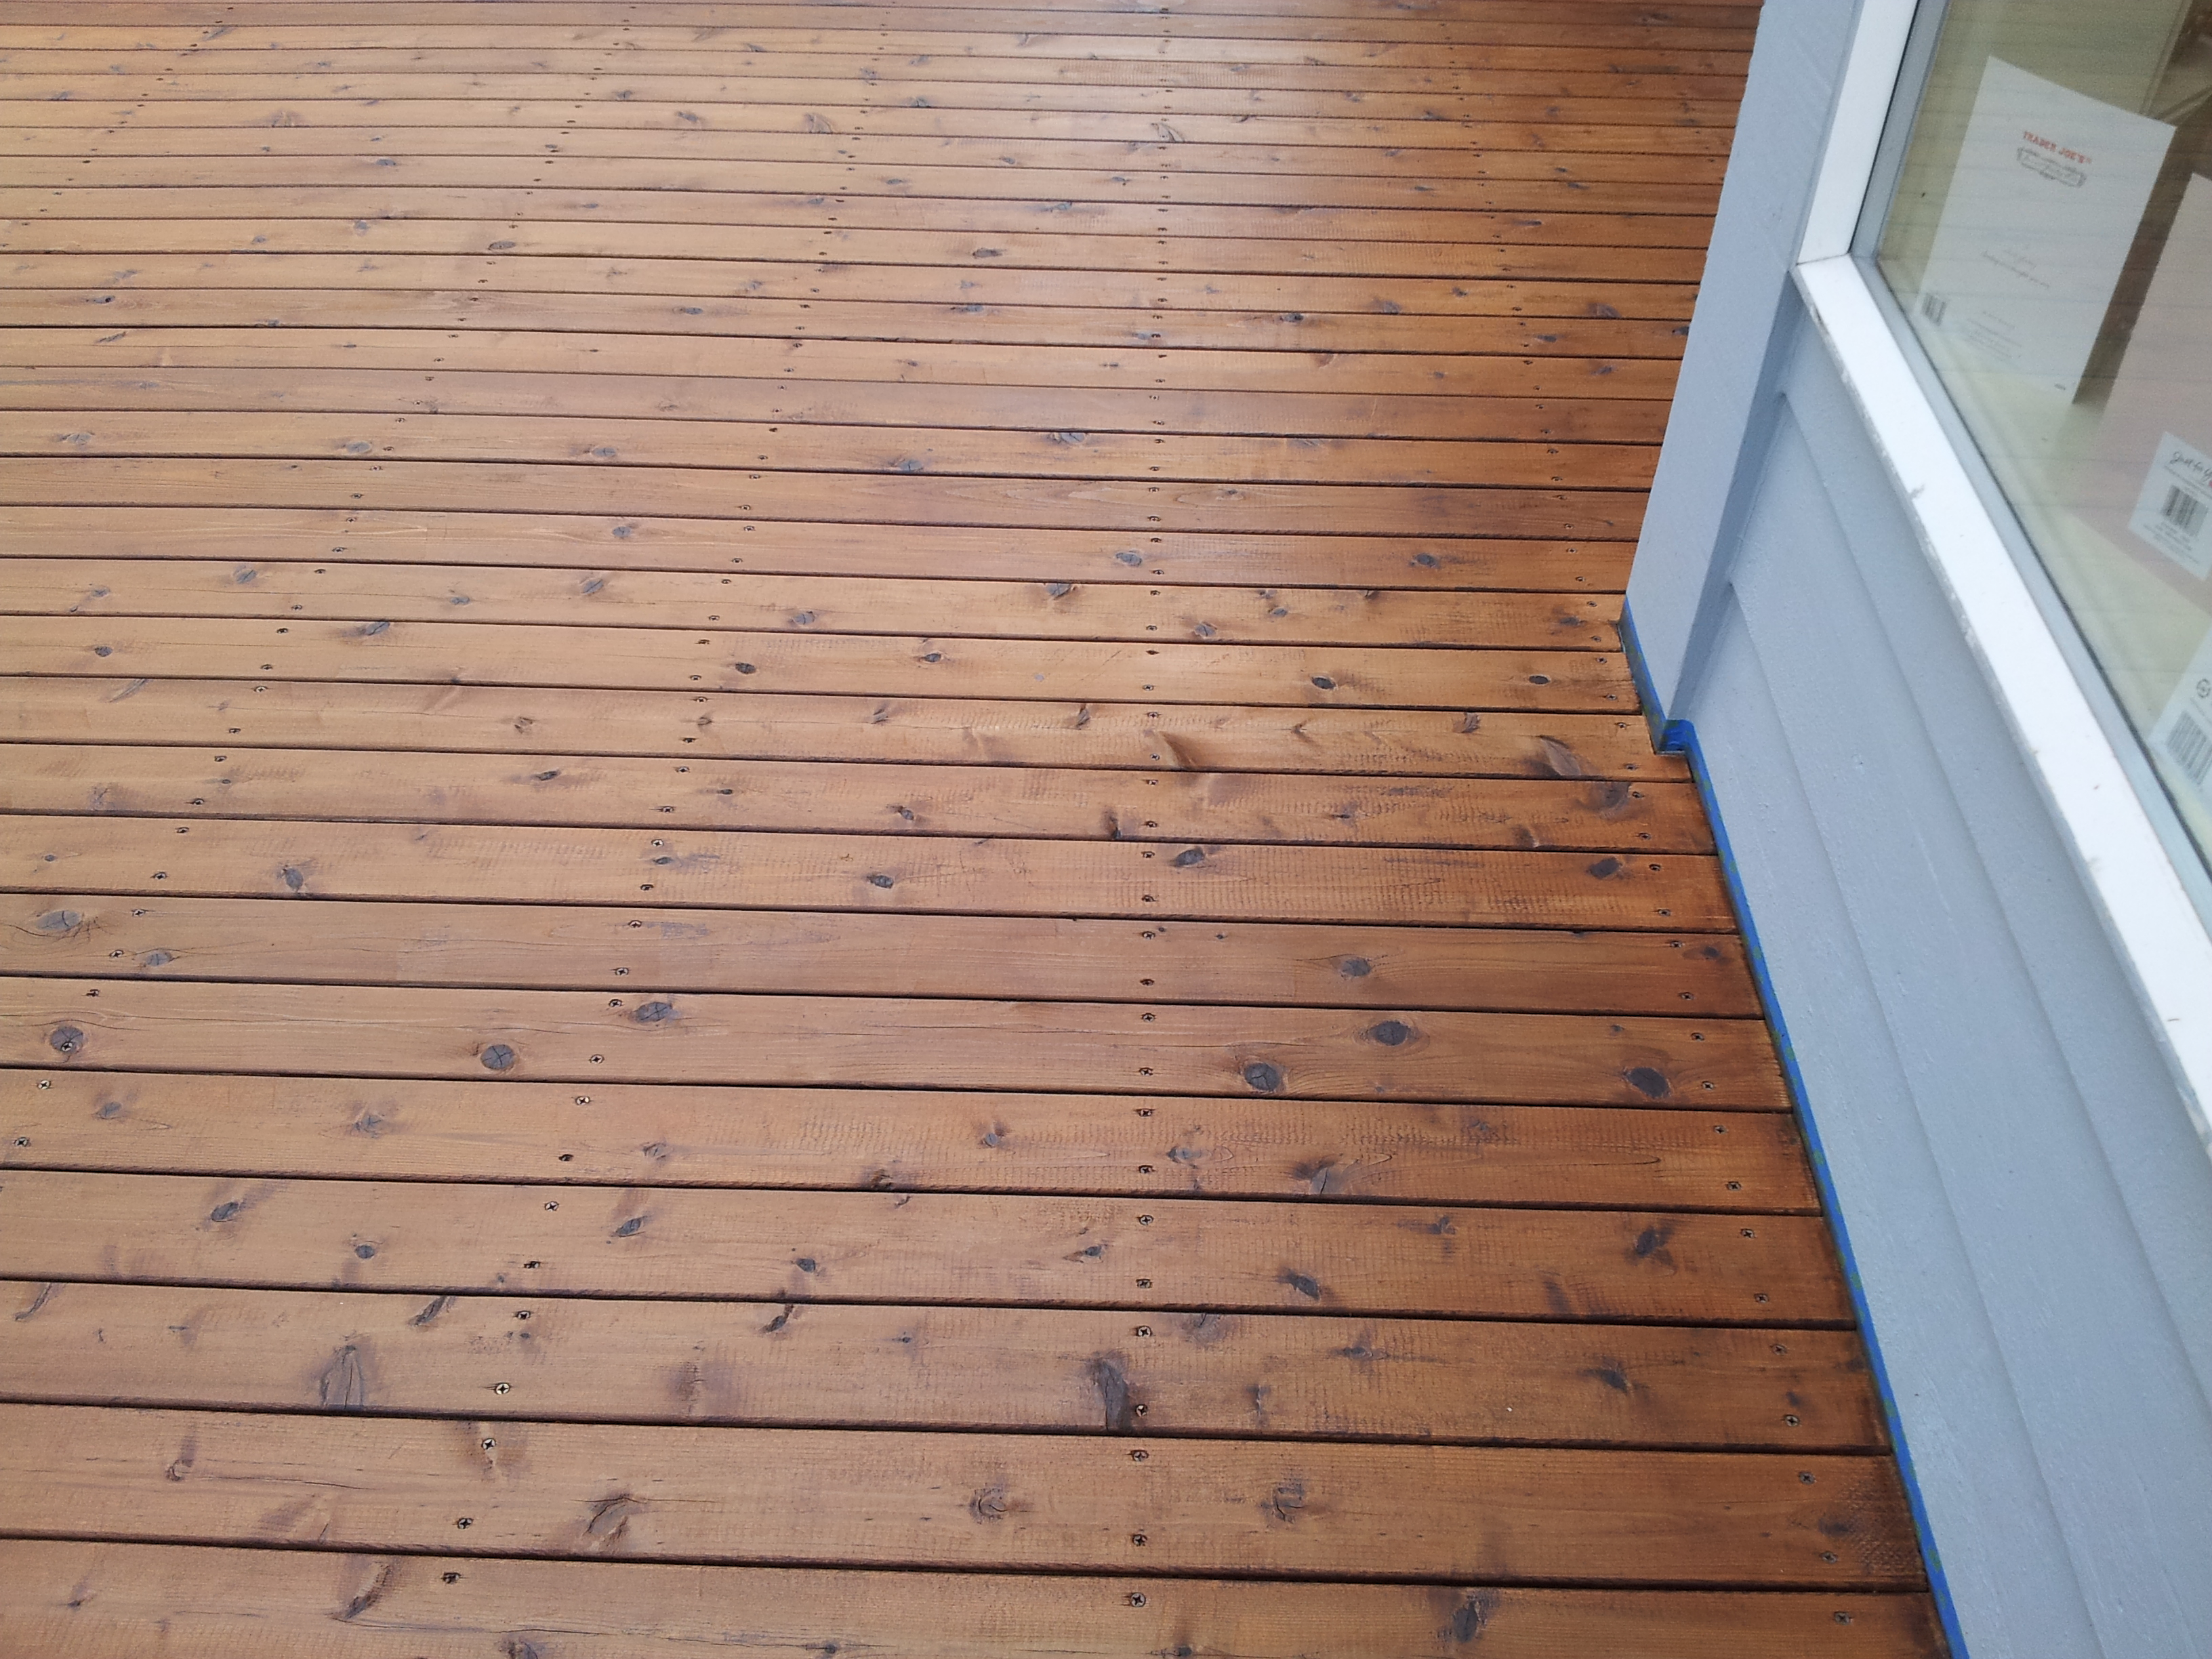 Oil Based Deck Stains 2018 Best Deck Stain Reviews Ratings for sizing 3264 X 2448